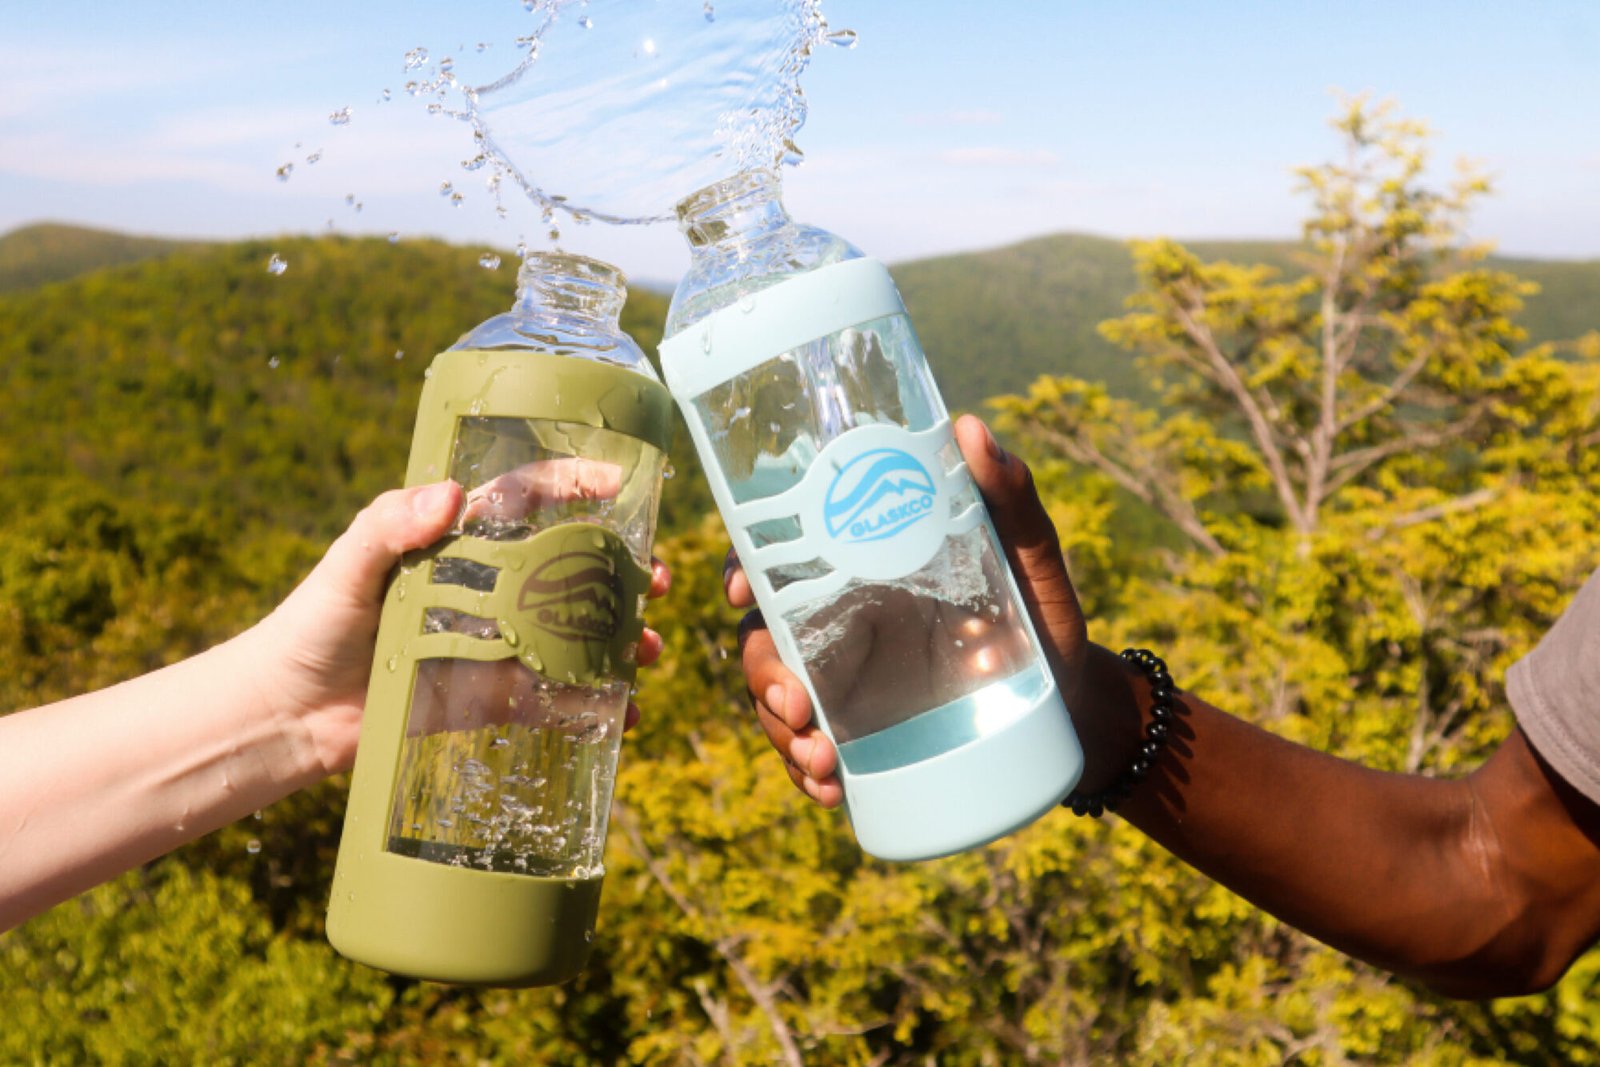 Two hands clinking together Glaskco Water Bottles in Columbia Blue and Army Green, creating a natural splash effect. Set against a backdrop of sunlit hilly mountains, emphasizing the bottles' outdoor versatility and style.